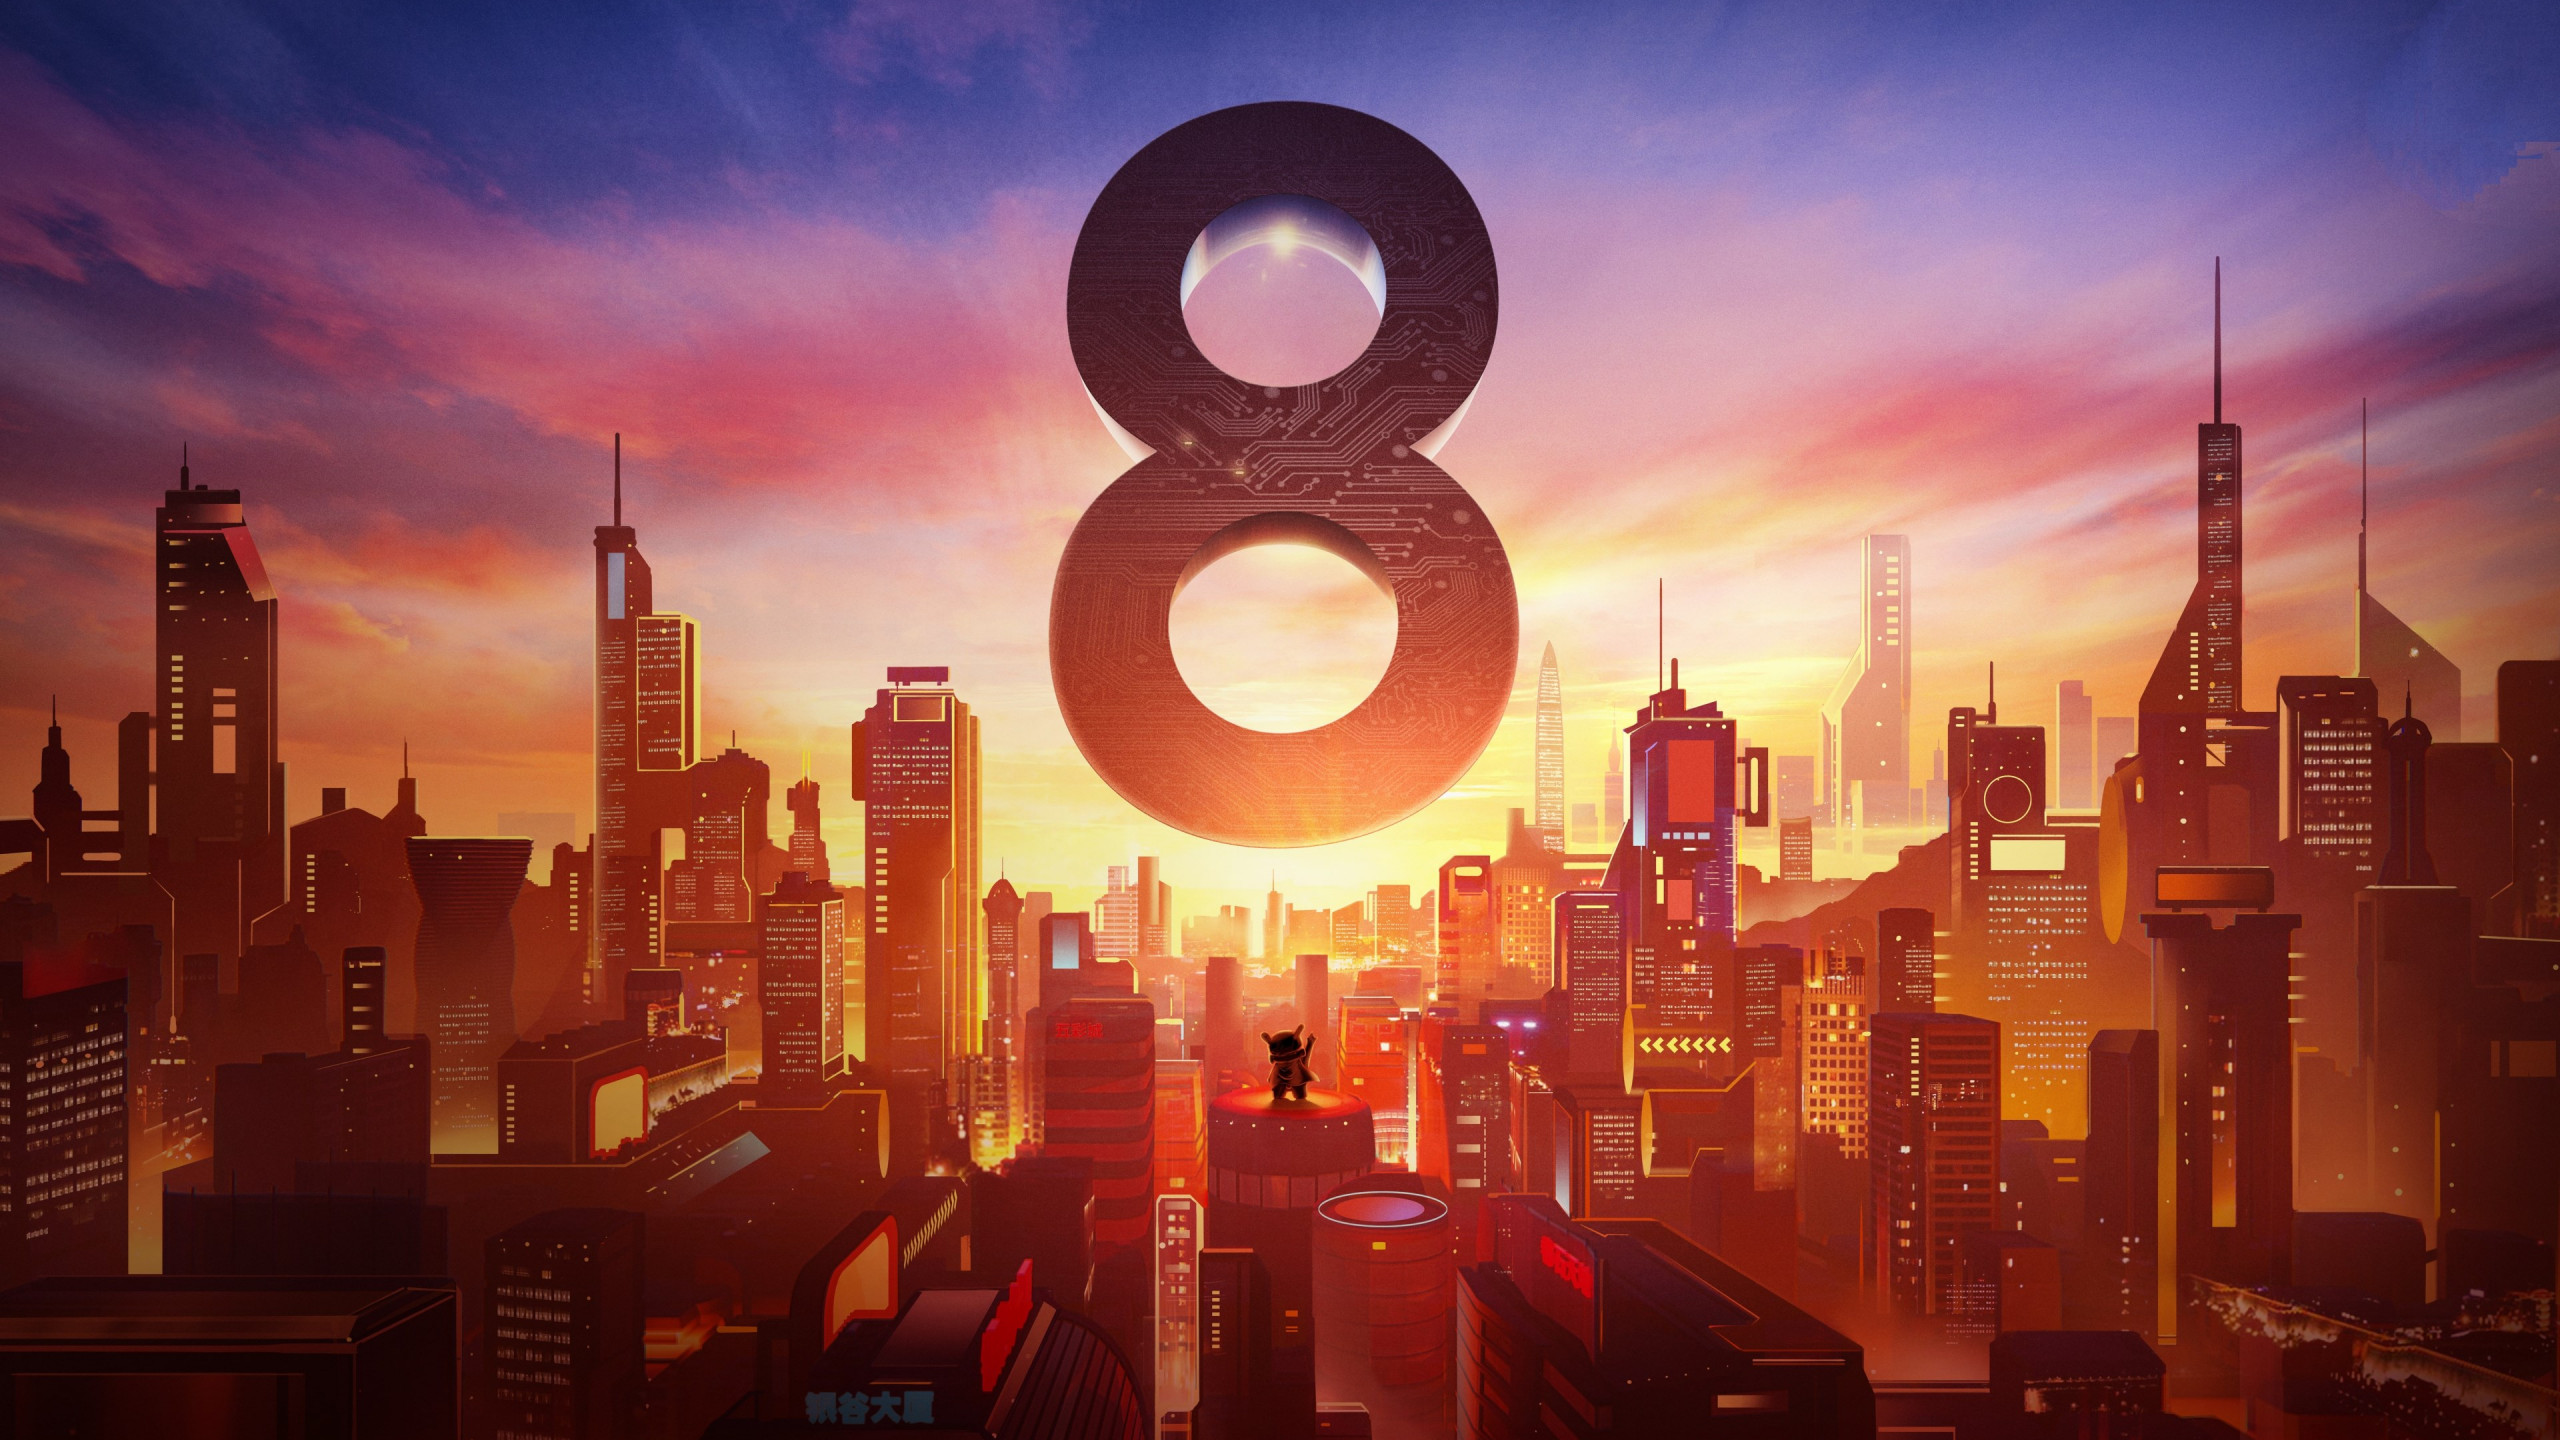 Xiaomi Mi 8. Poster from the launch event wallpaper 2560x1440